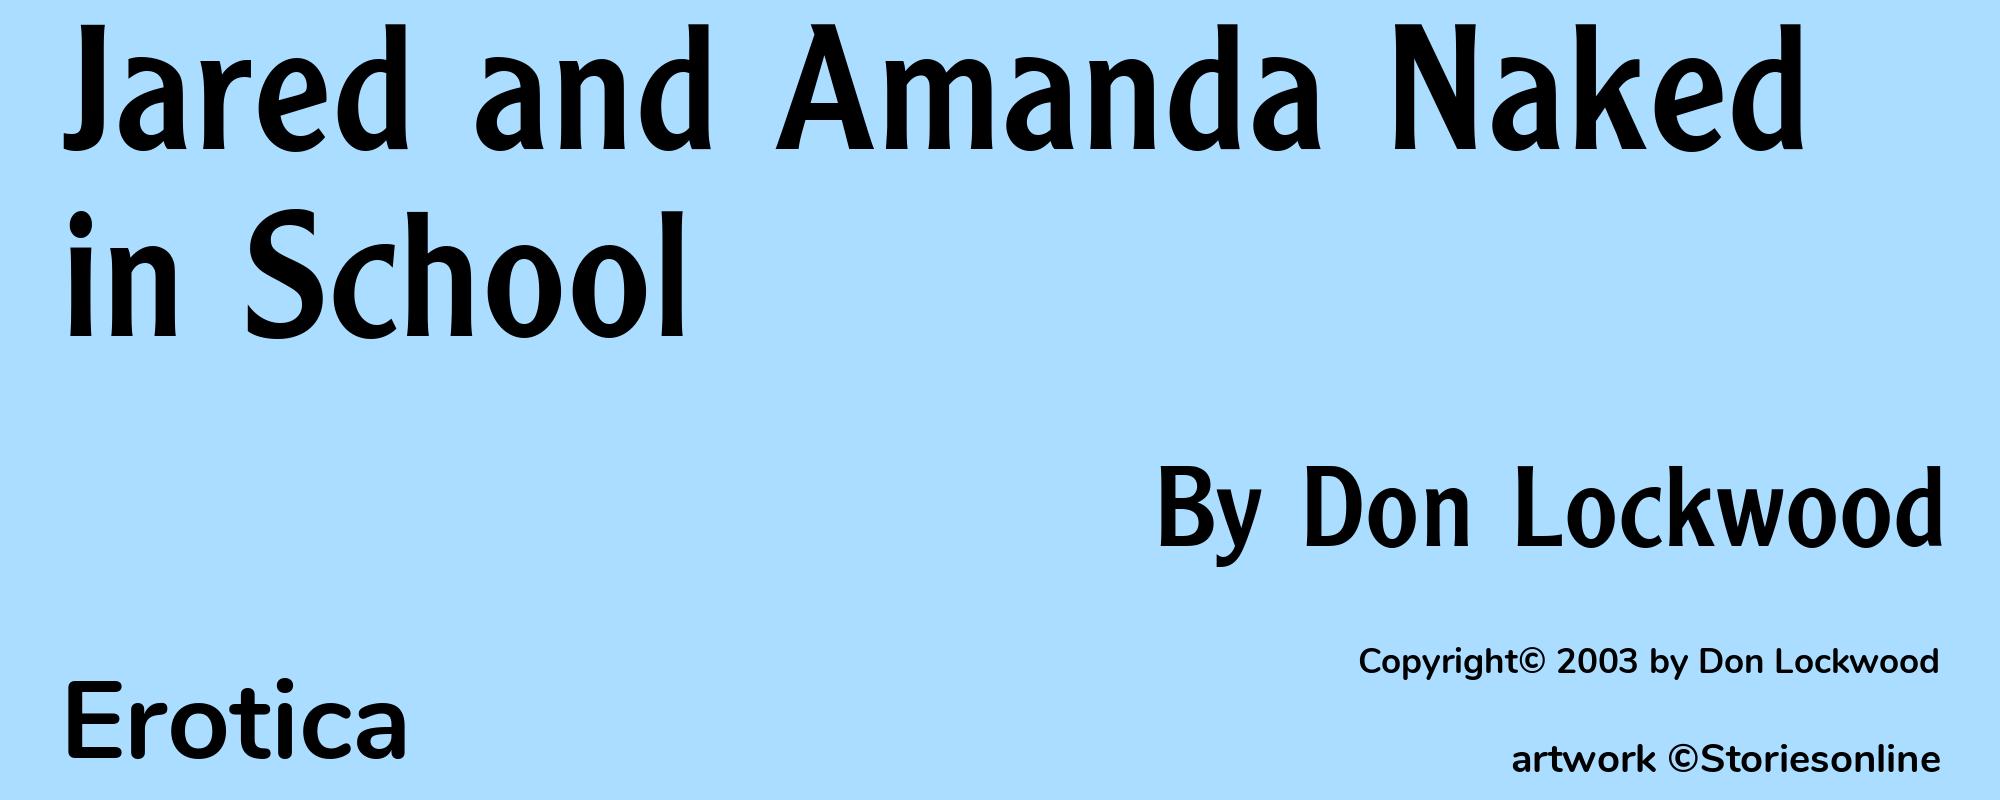 Jared and Amanda Naked in School - Cover